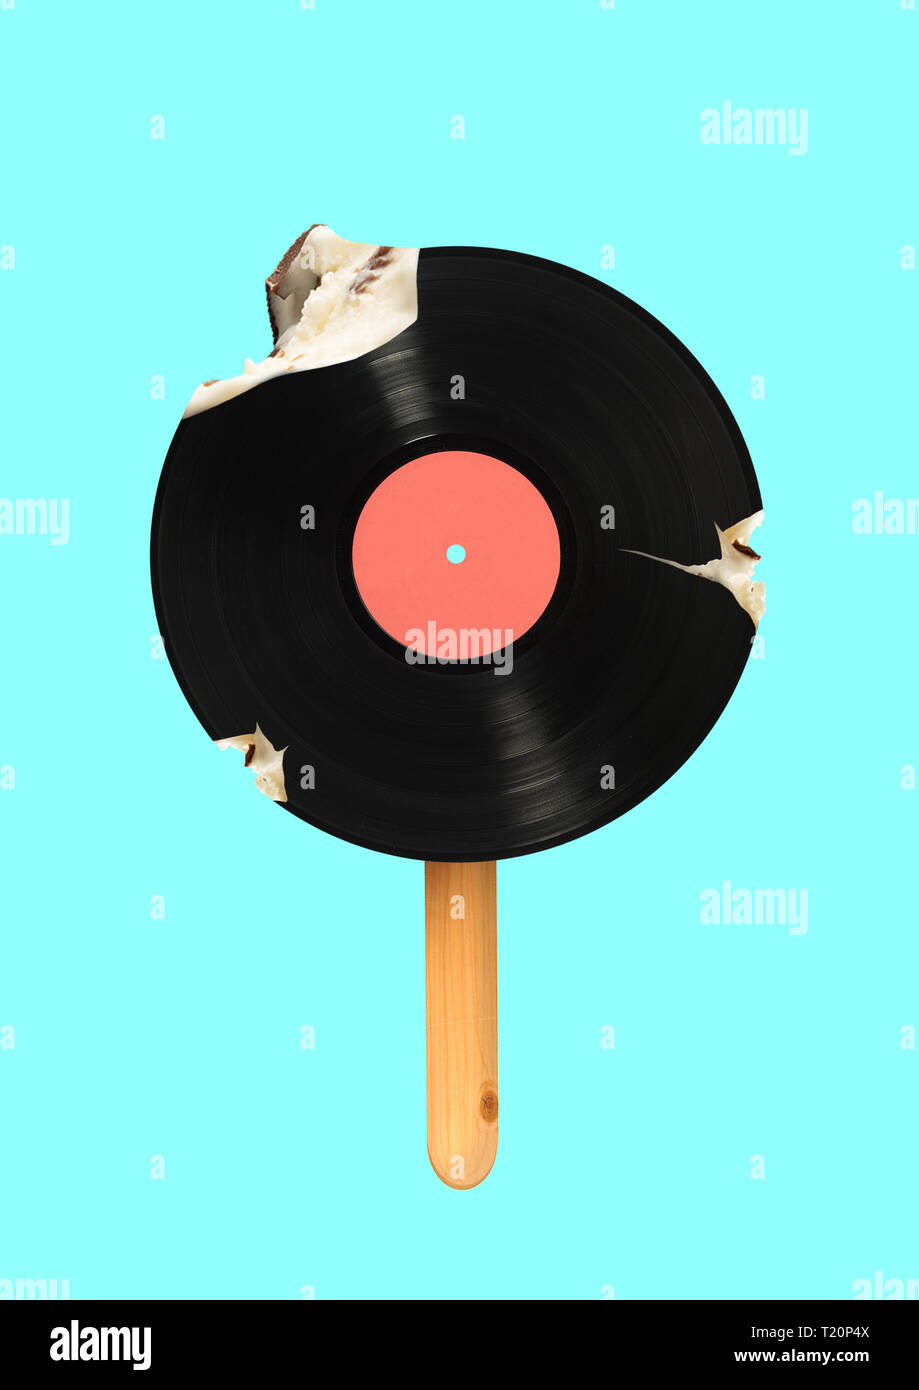 An alternative icecream. Meloman wanna bite a piece of immortal music. Vinyl record formed icecream on a wooden stick against blue sky colored background. Modern design. Contemporary art collage. Stock Photo